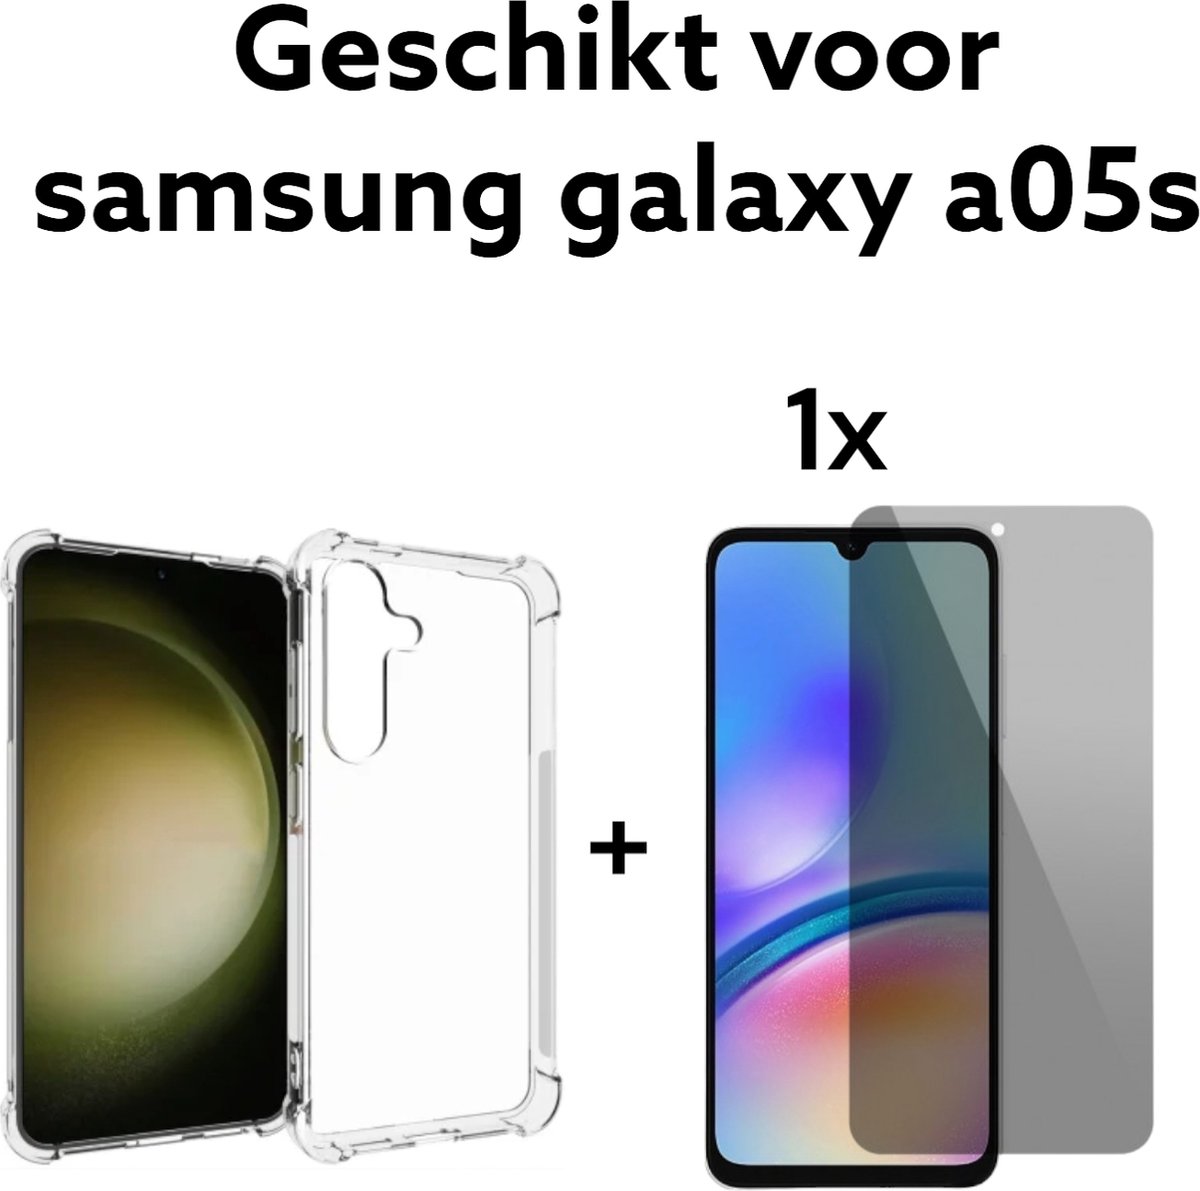 samsung galaxy a05s transparant antishock backcover + 1x privacy screenprotector | samsung galaxy a05s doorzichtig antischok achterkant + 1x privacy tempered glas protectie